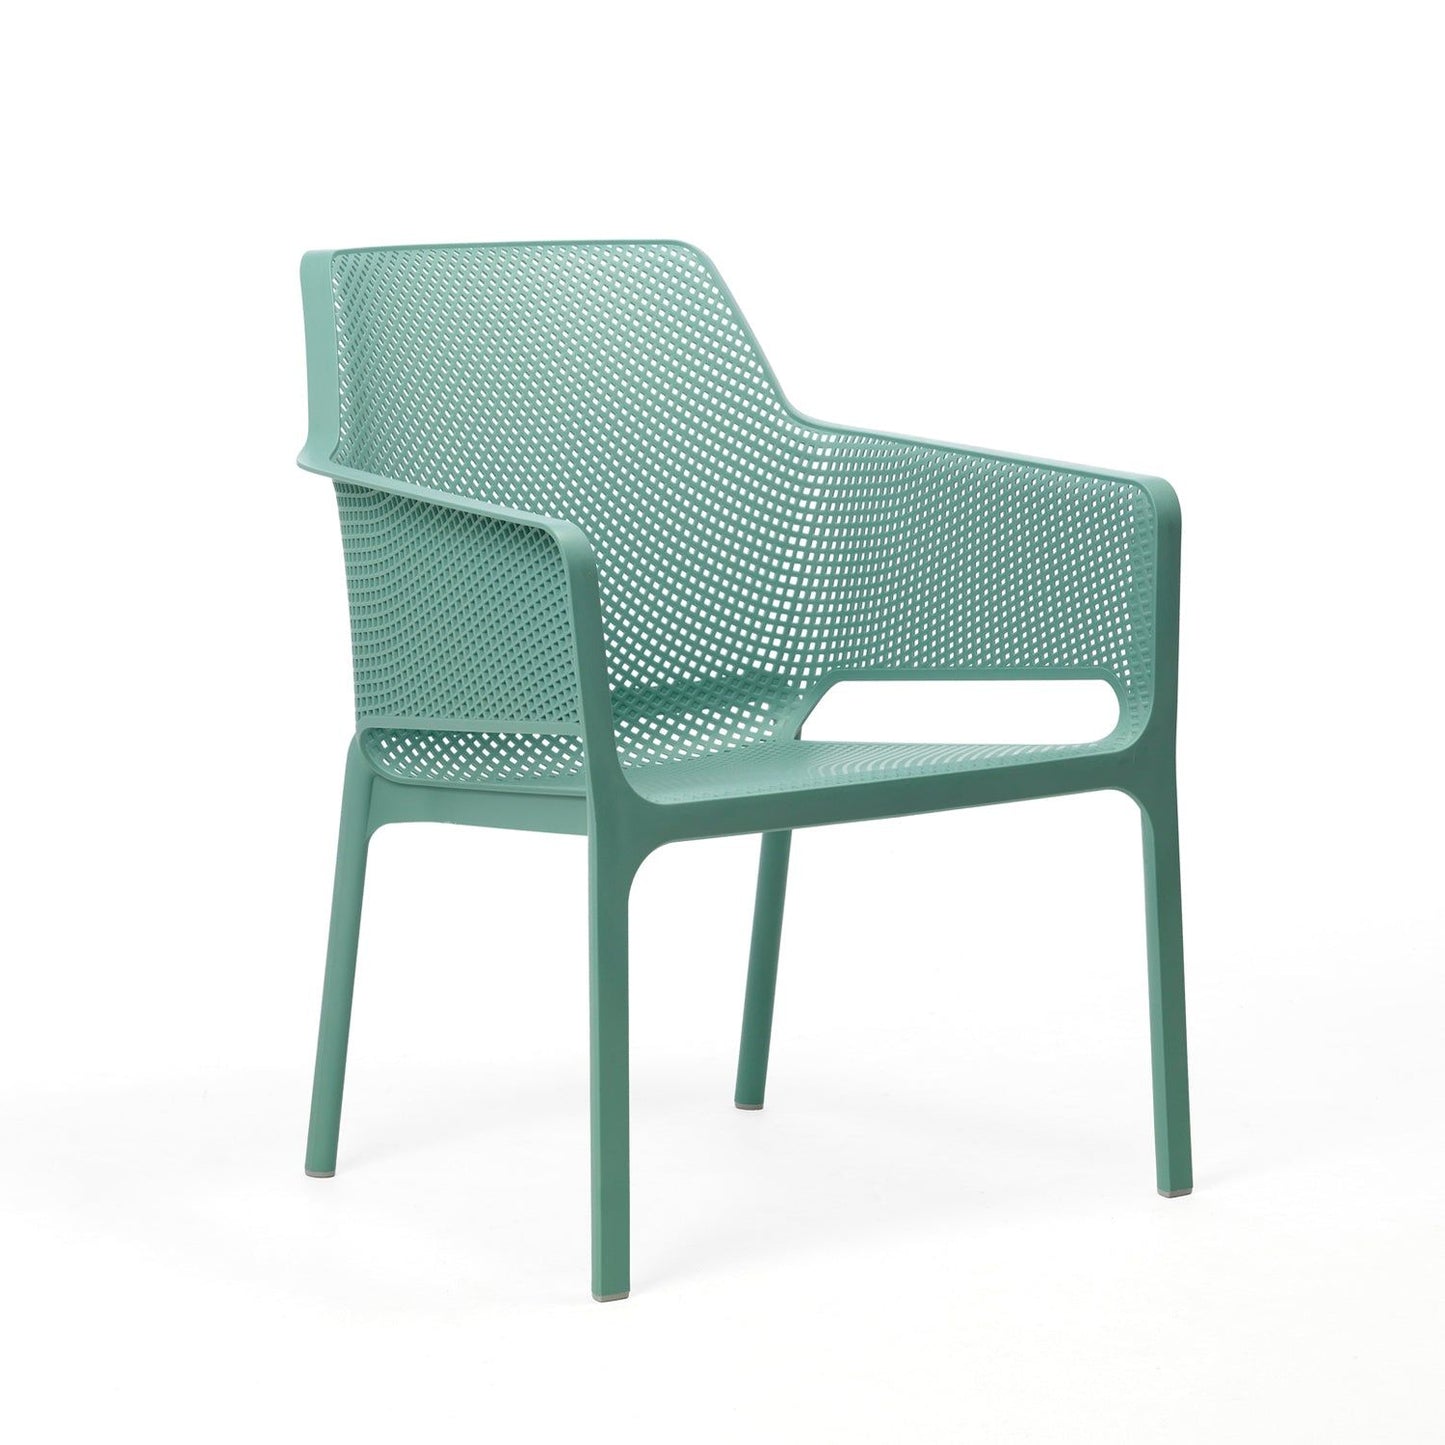 Net Relax Garden Chair By Nardi - Set Of 6 - Turquoise 